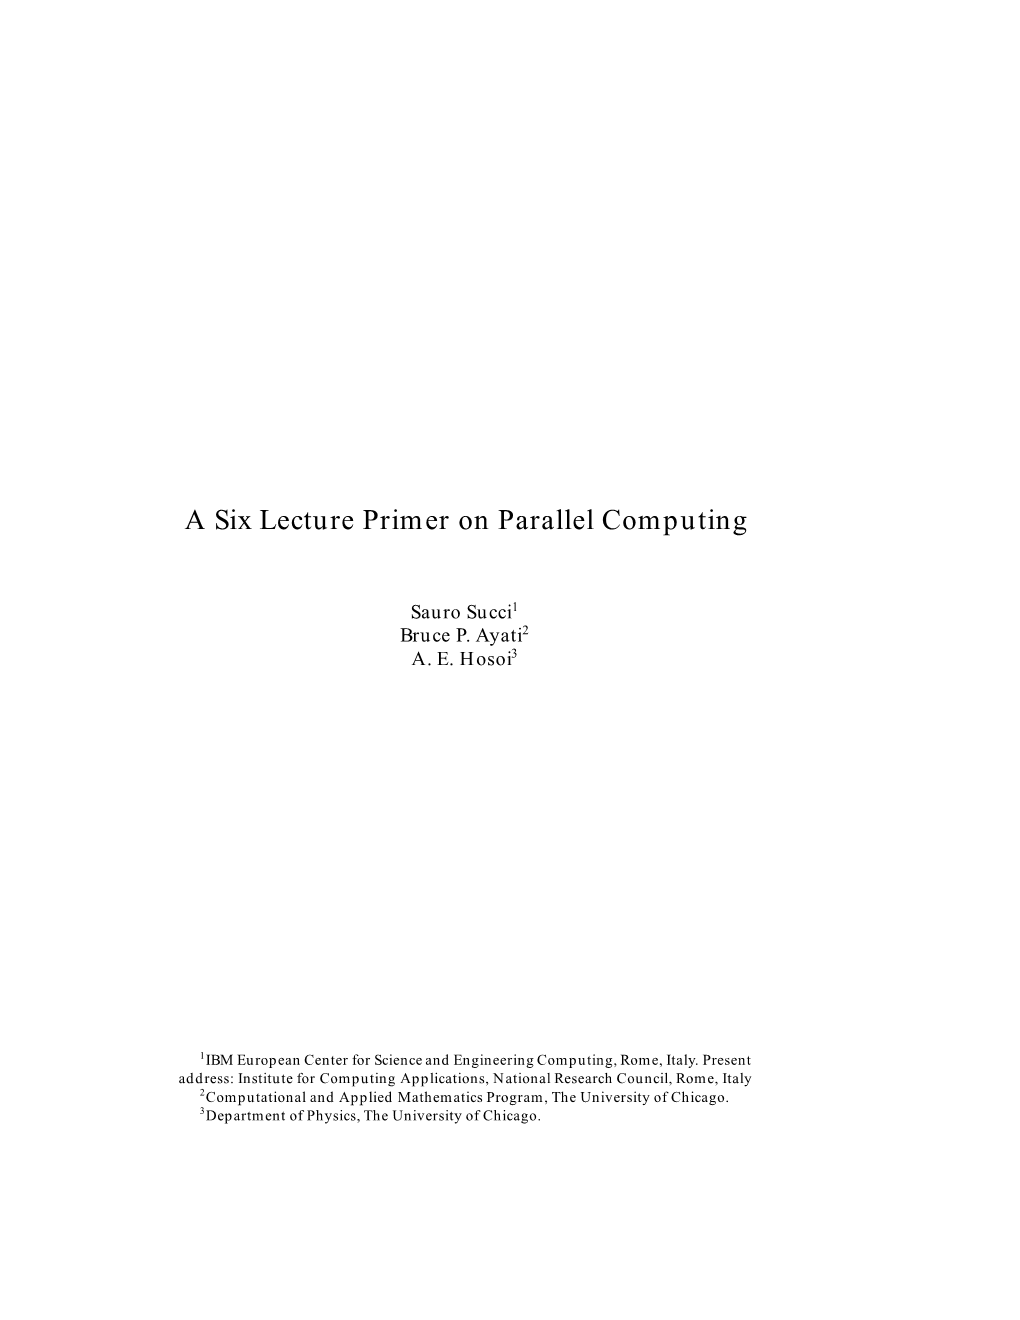 A Six Lecture Primer on Parallel Computing